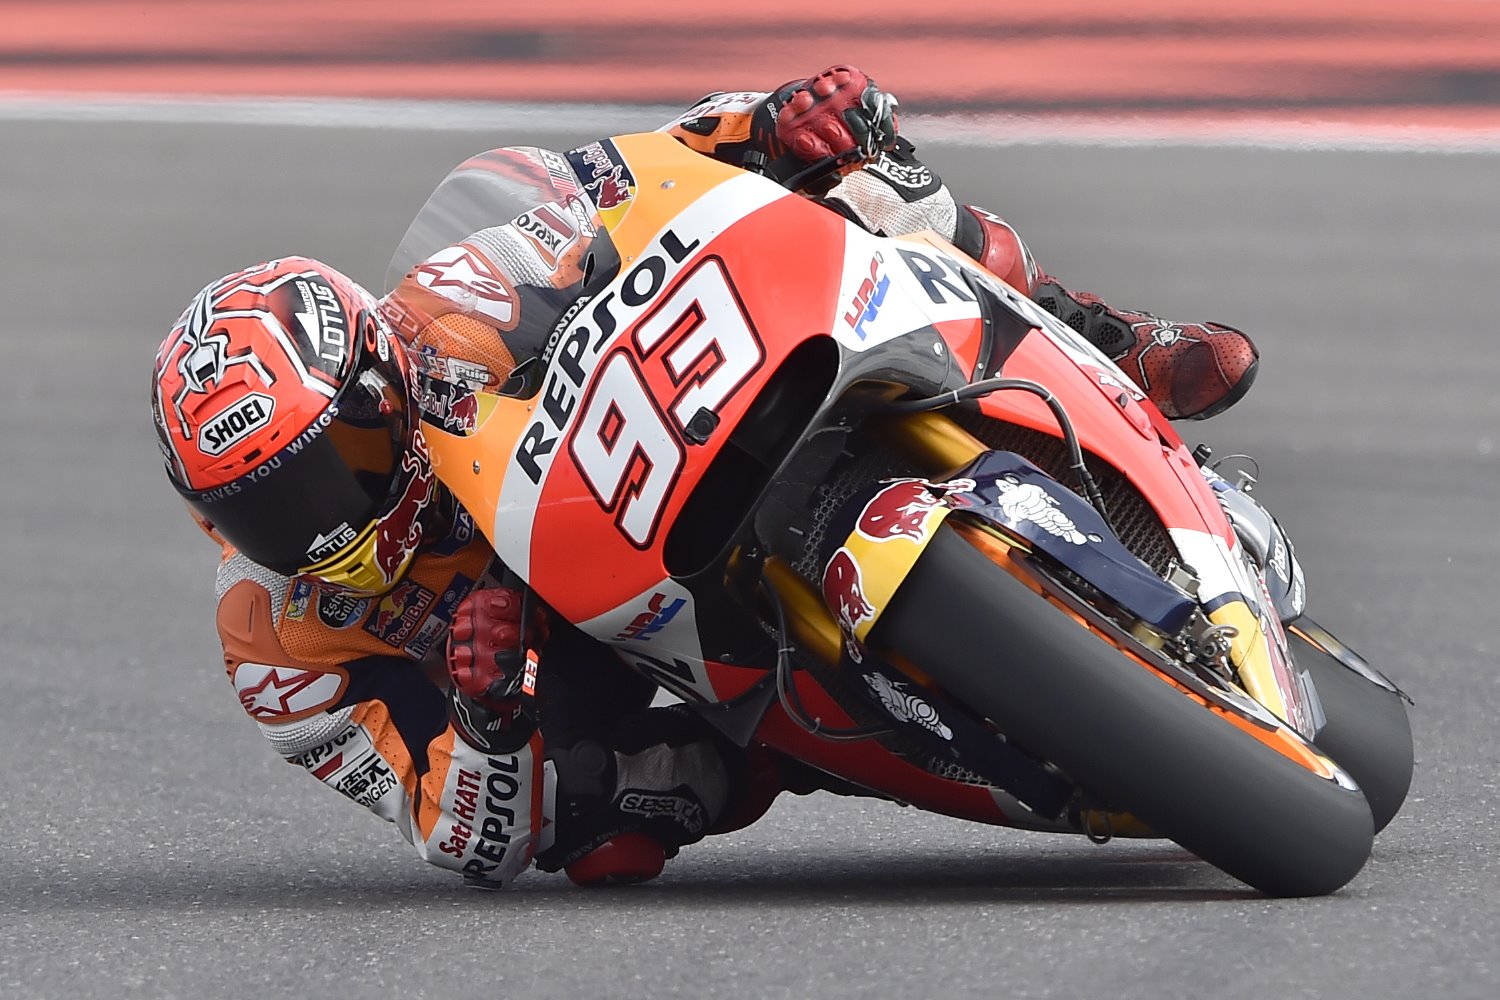 Marc Marquez rides to a dominant win